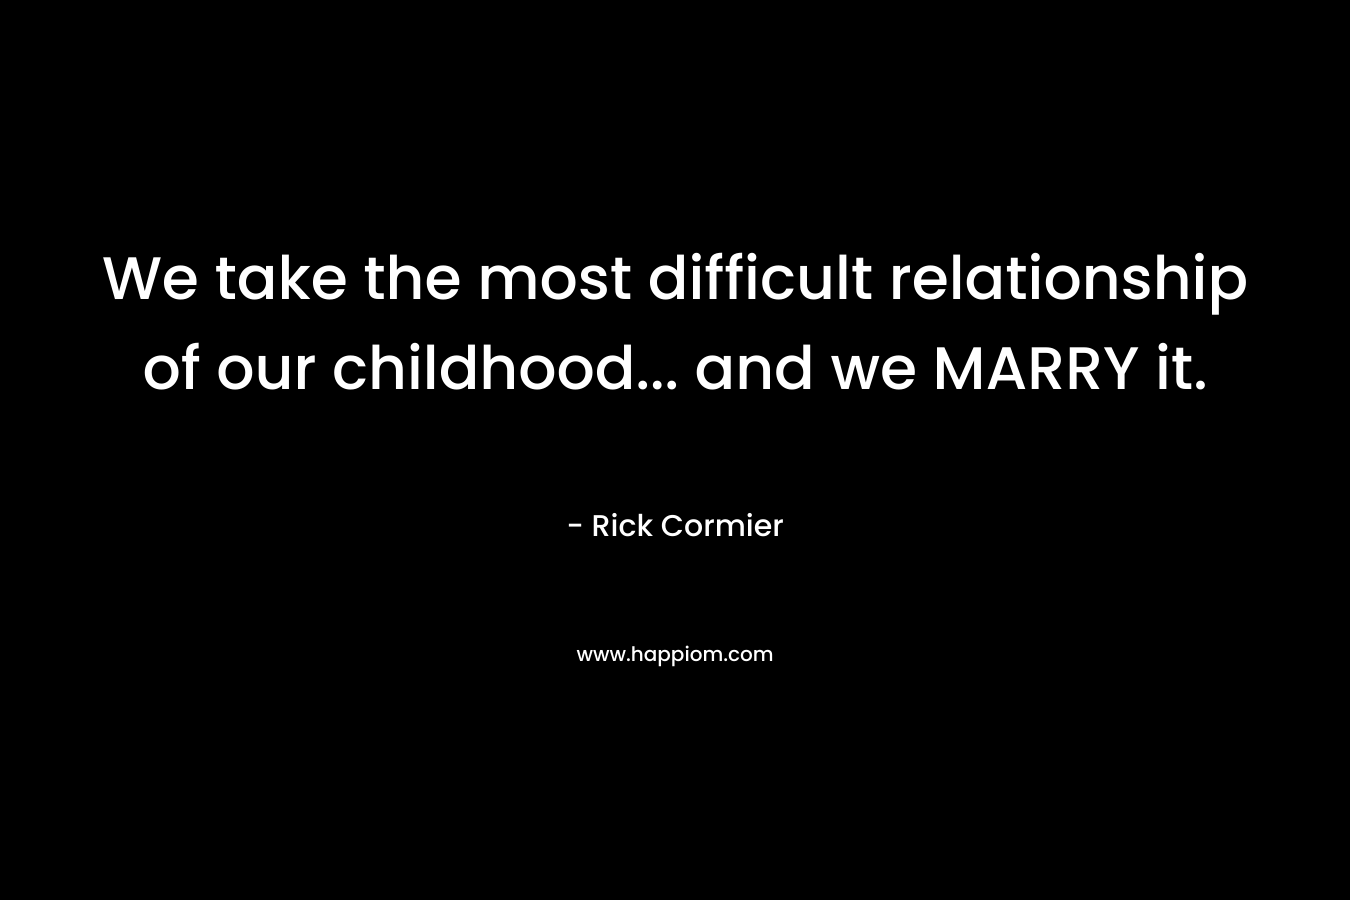 We take the most difficult relationship of our childhood… and we MARRY it. – Rick Cormier